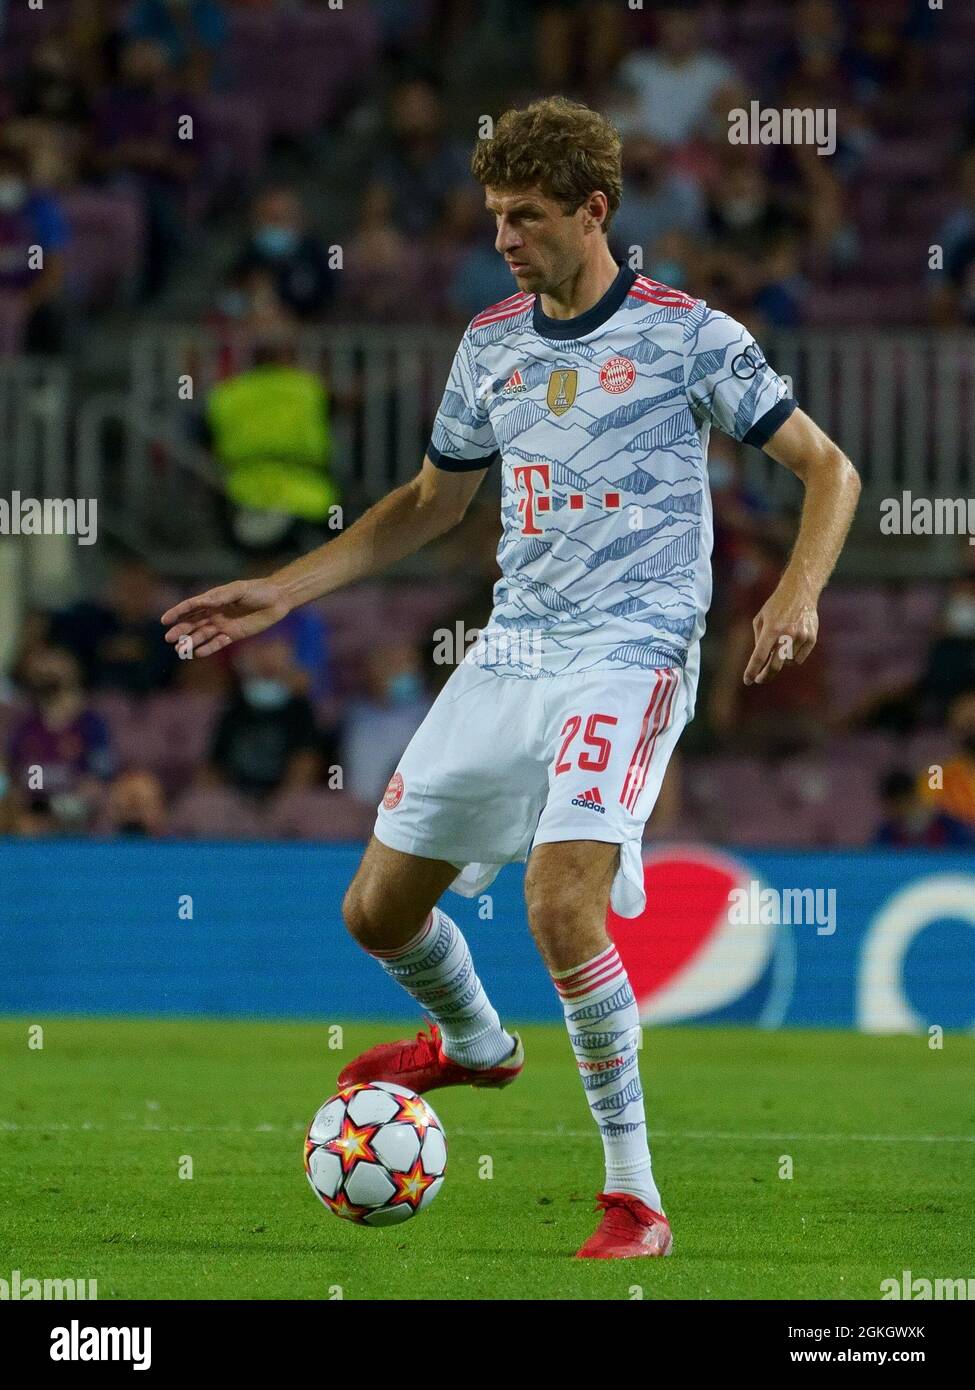 Barcelona, Spain. 14/09/2021, Thomas Muller of FC Bayern Munich during the UEFA Champions League match between FC Barcelona and FC Bayern Munich at Camp Nou in Barcelona, Spain. Stock Photo